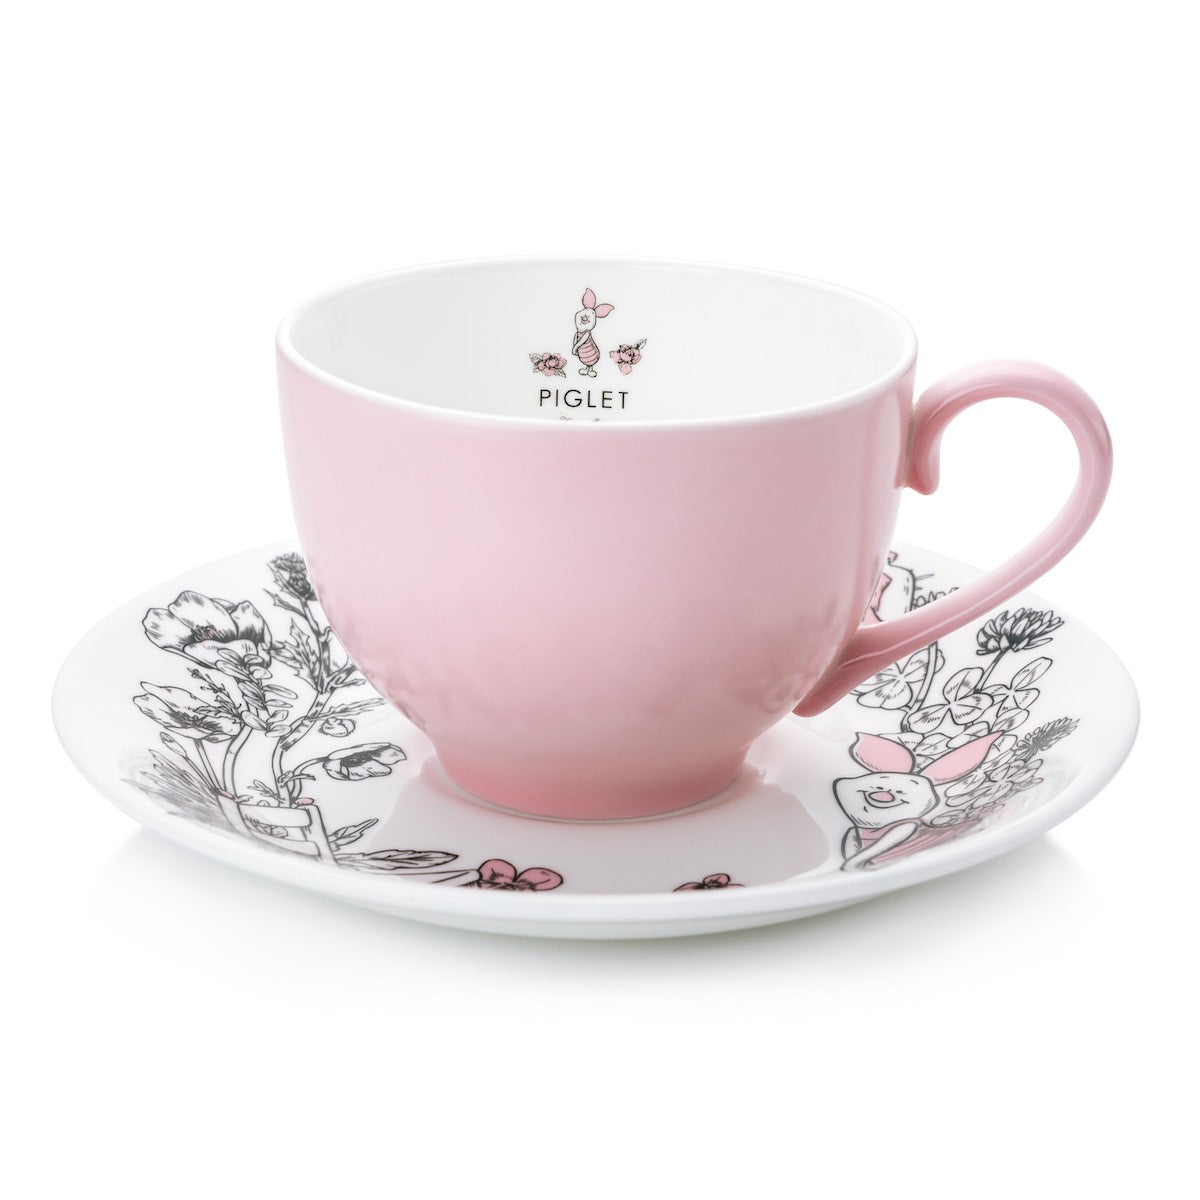 Winnie The Pooh - Piglet - Cup & Saucer - The English Ladies Co - Pop Culture Larrikin 